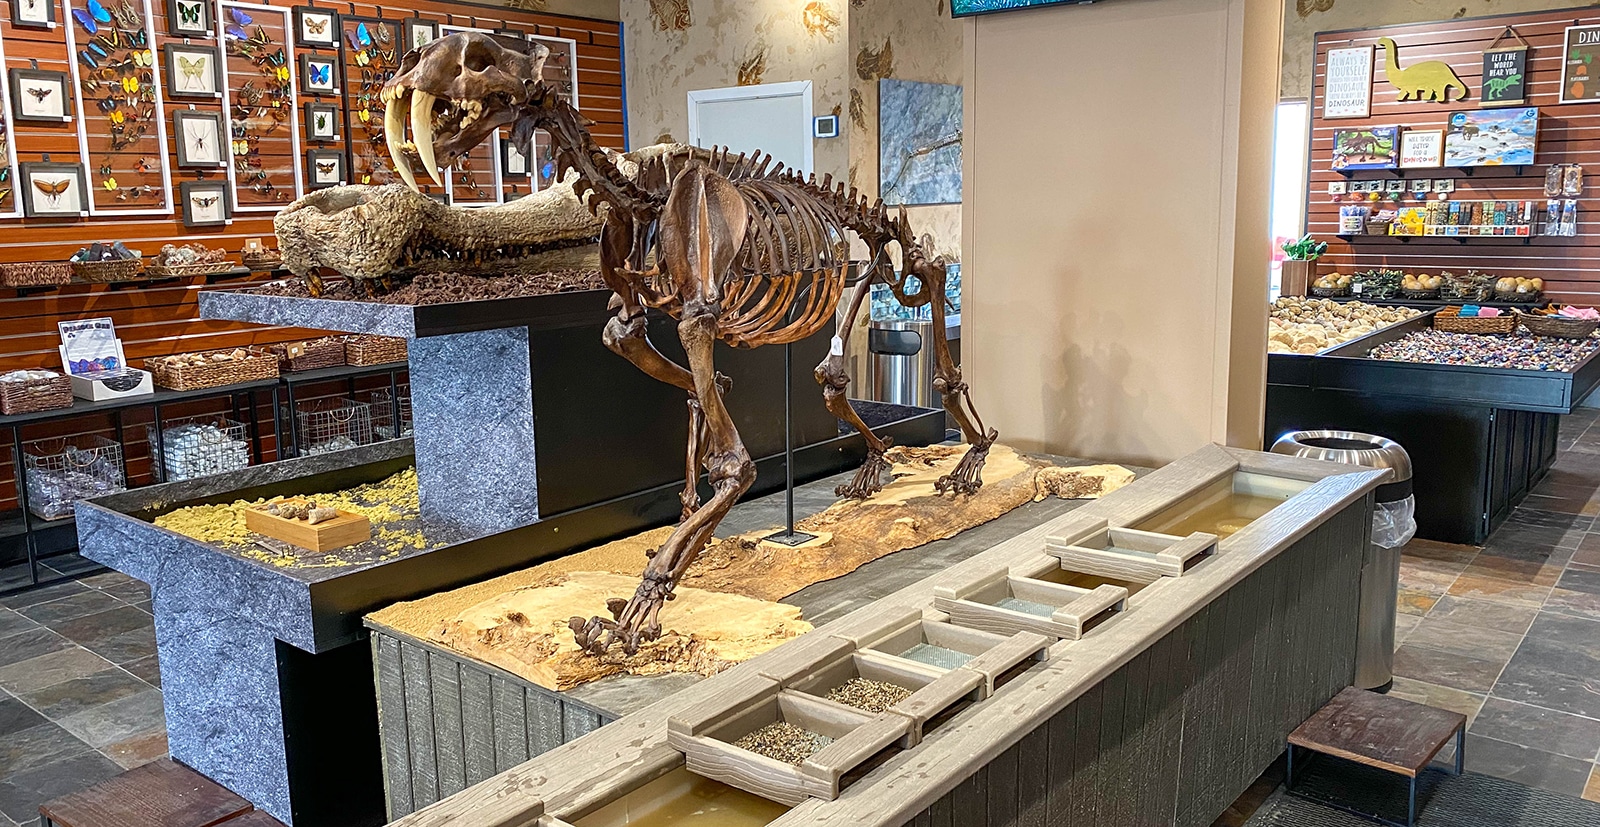 Tyrannostorus has high-end relics and replicas for science and history enthusiasts.